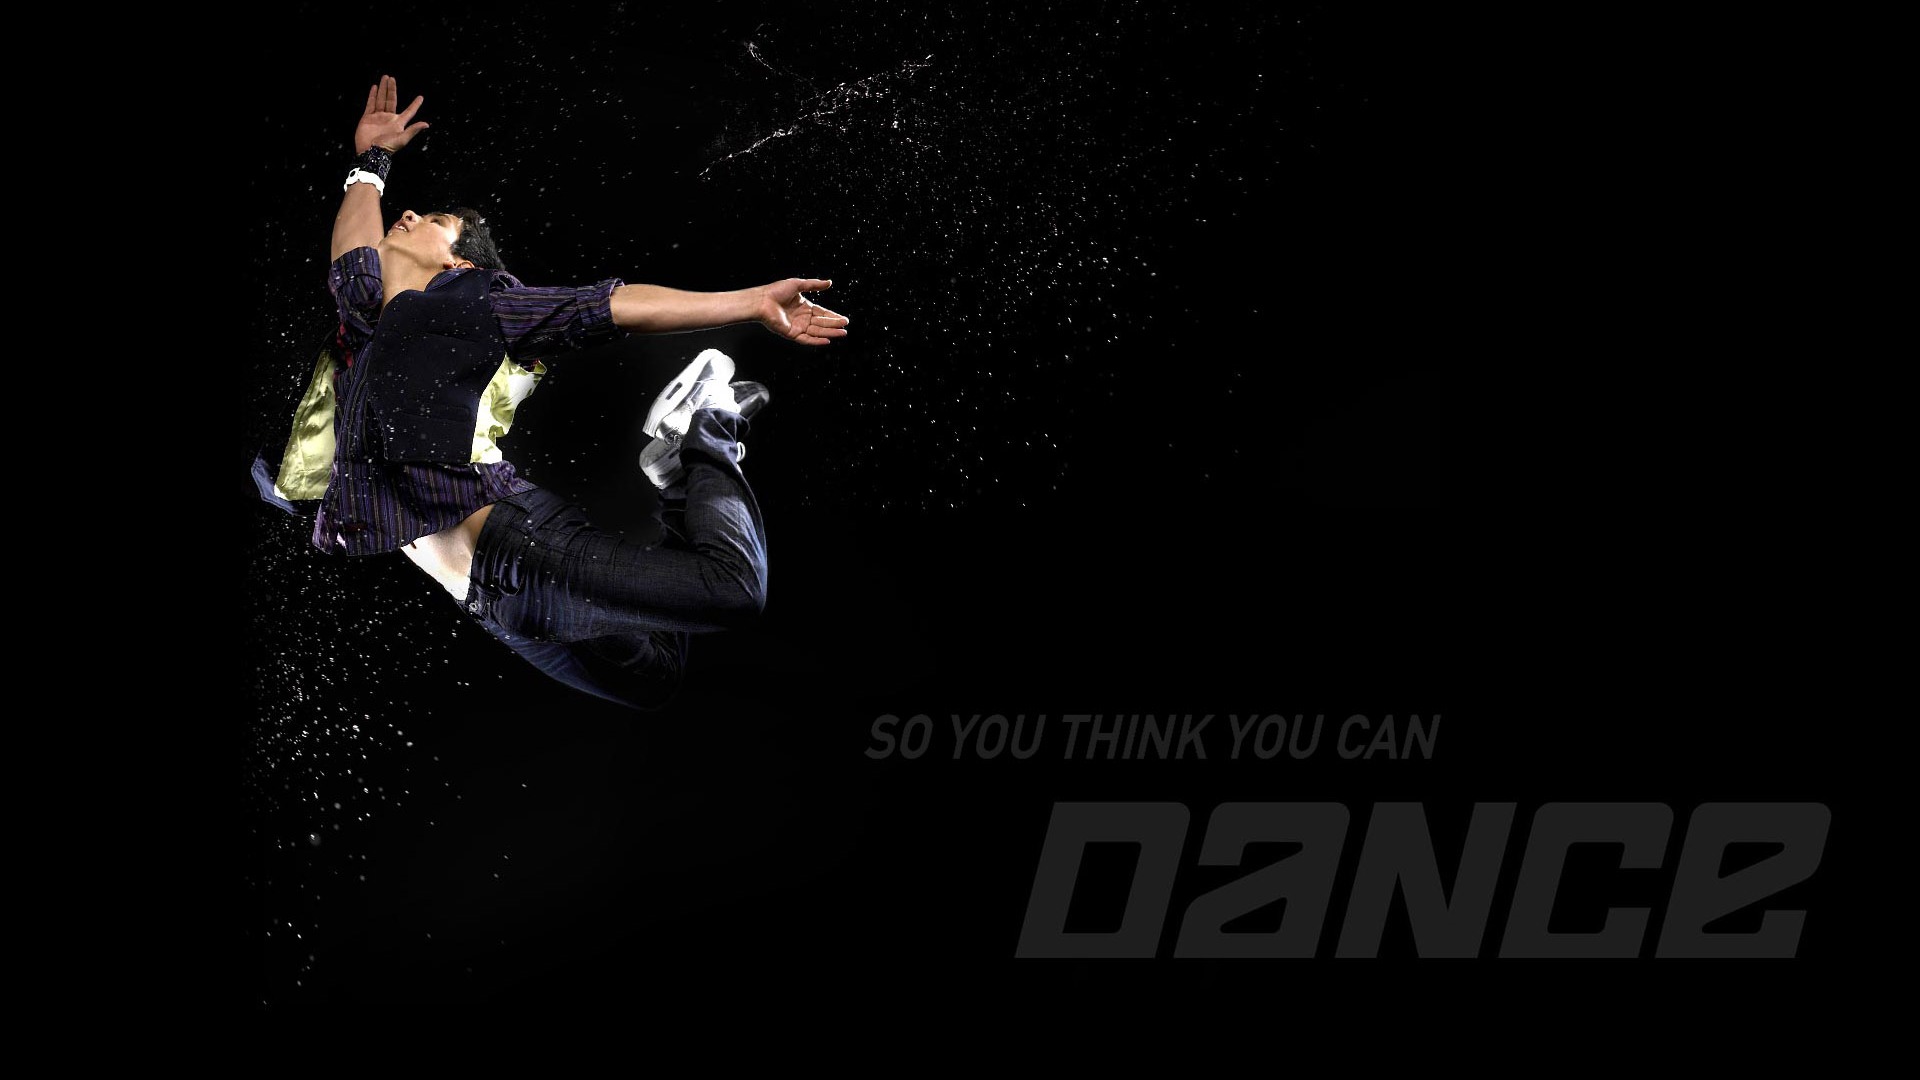 So You Think You Can Dance wallpaper (1) #8 - 1920x1080